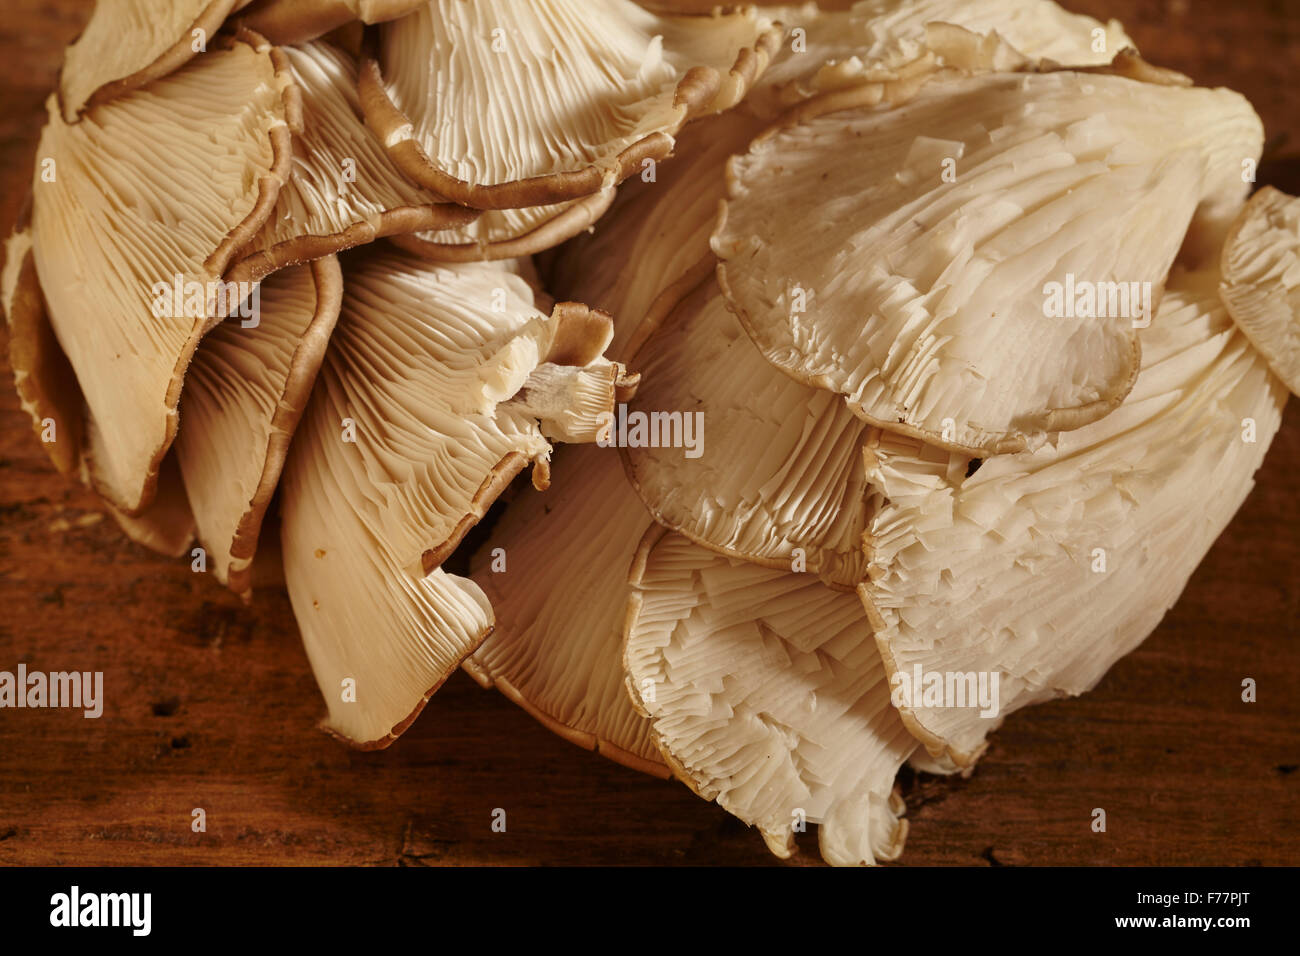 Cultivated Oyster Mushrooms From Pennsylvania, USA Stock Photo